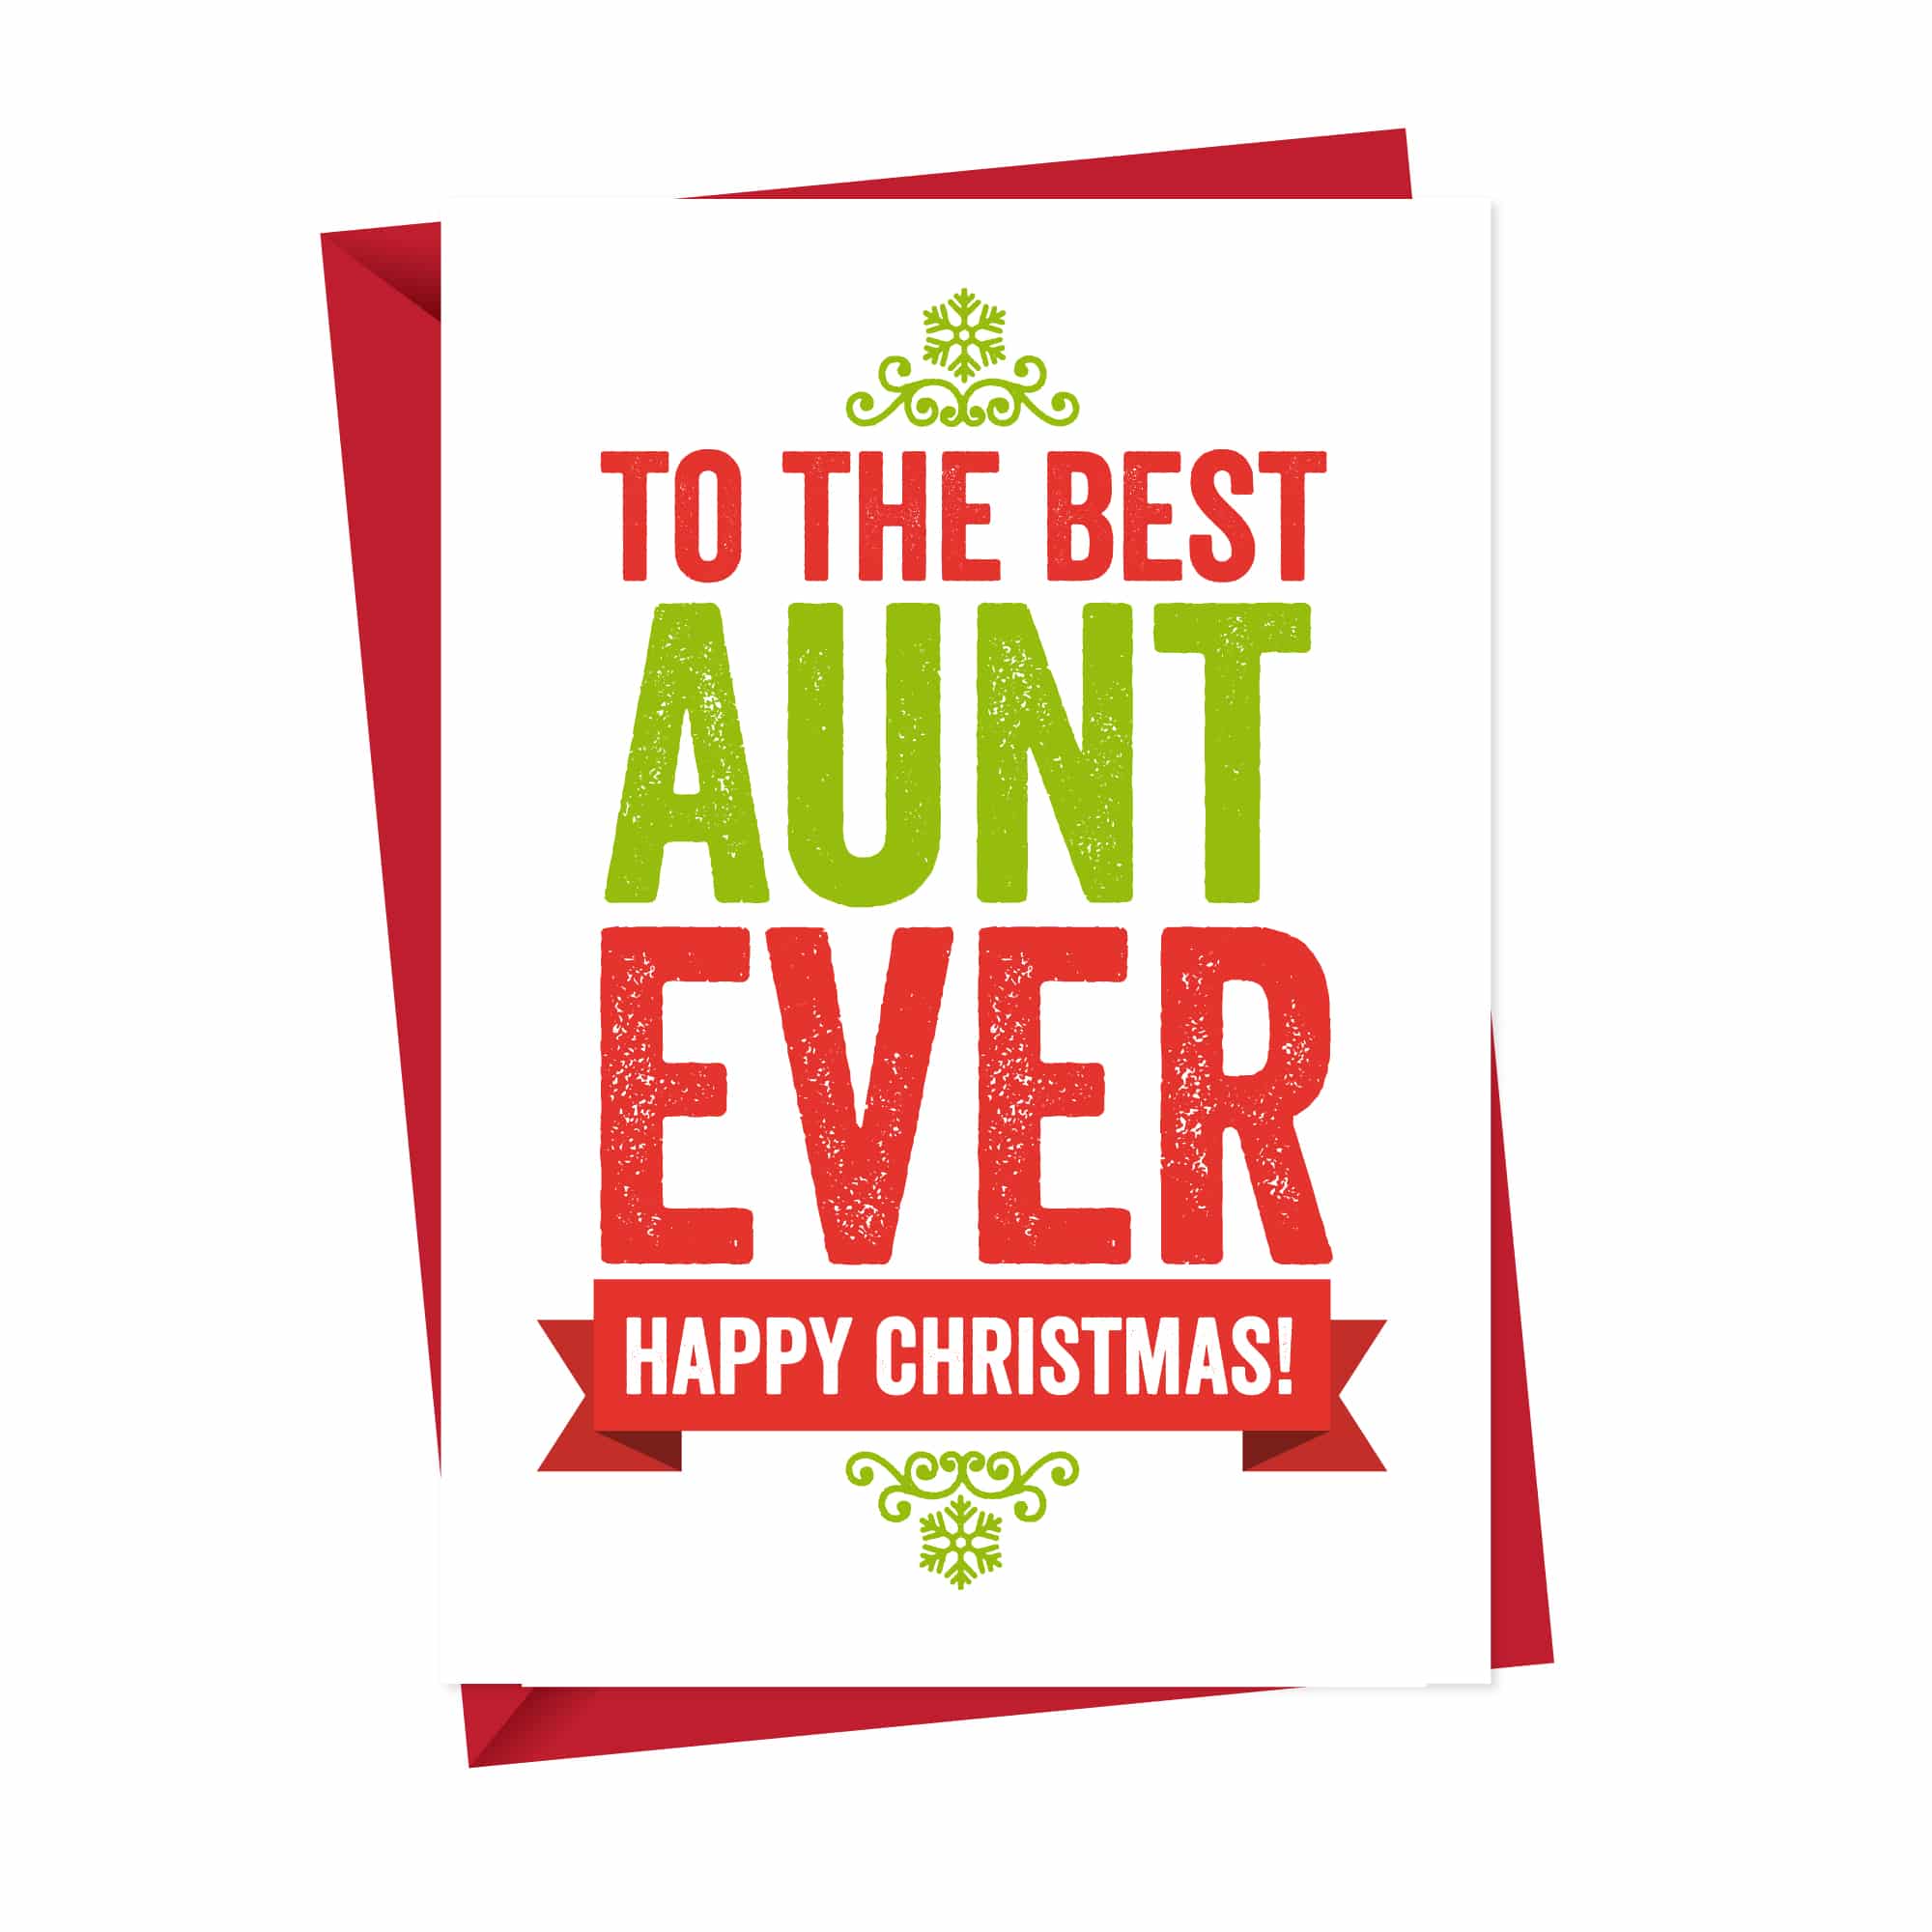 Christmas card for Aunt